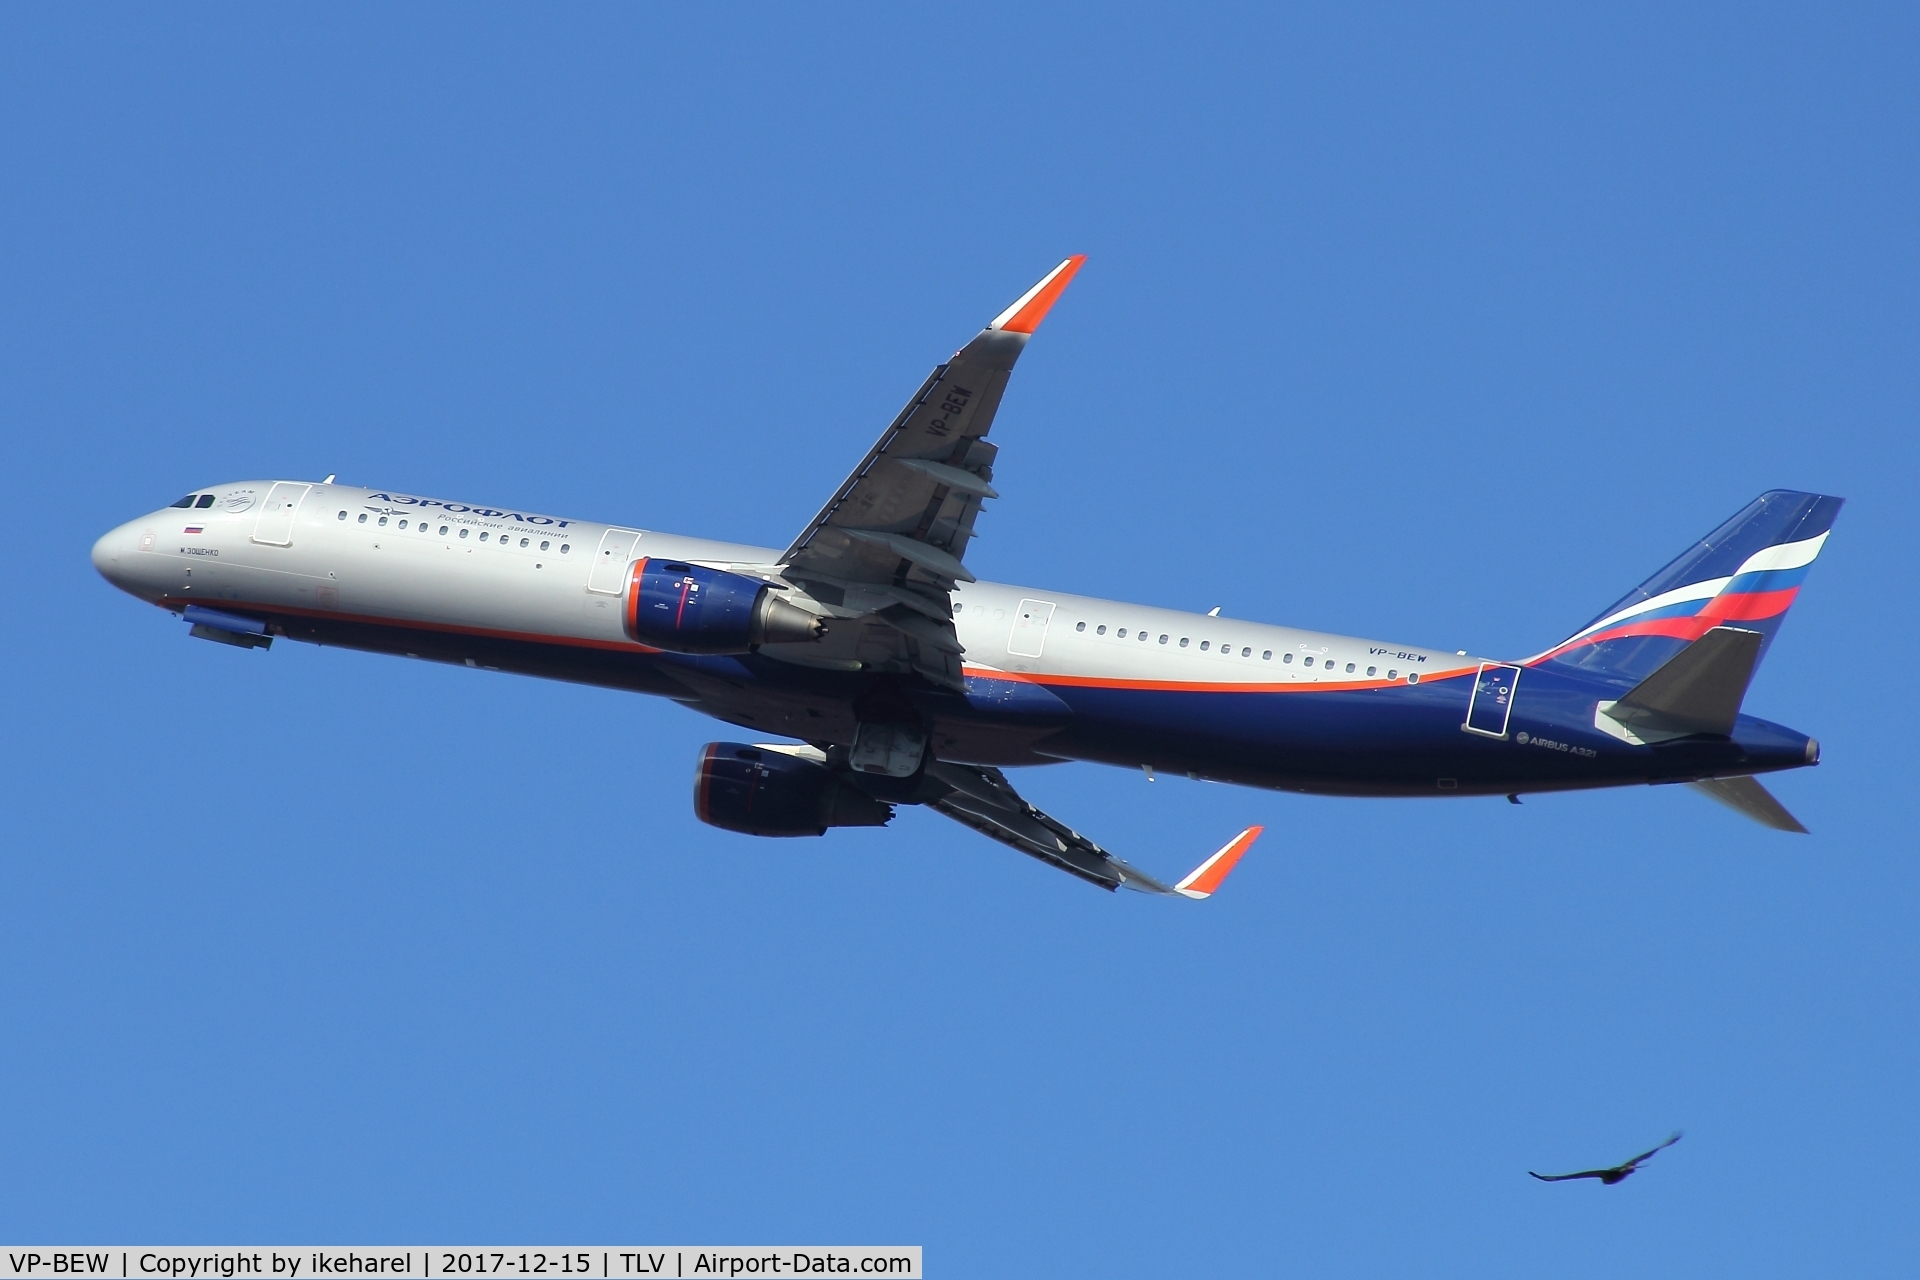 VP-BEW, 2016 Airbus A321-211 C/N 7072, Aeroflot Airbus and a vulture, when taken-off en-route to Moscow.